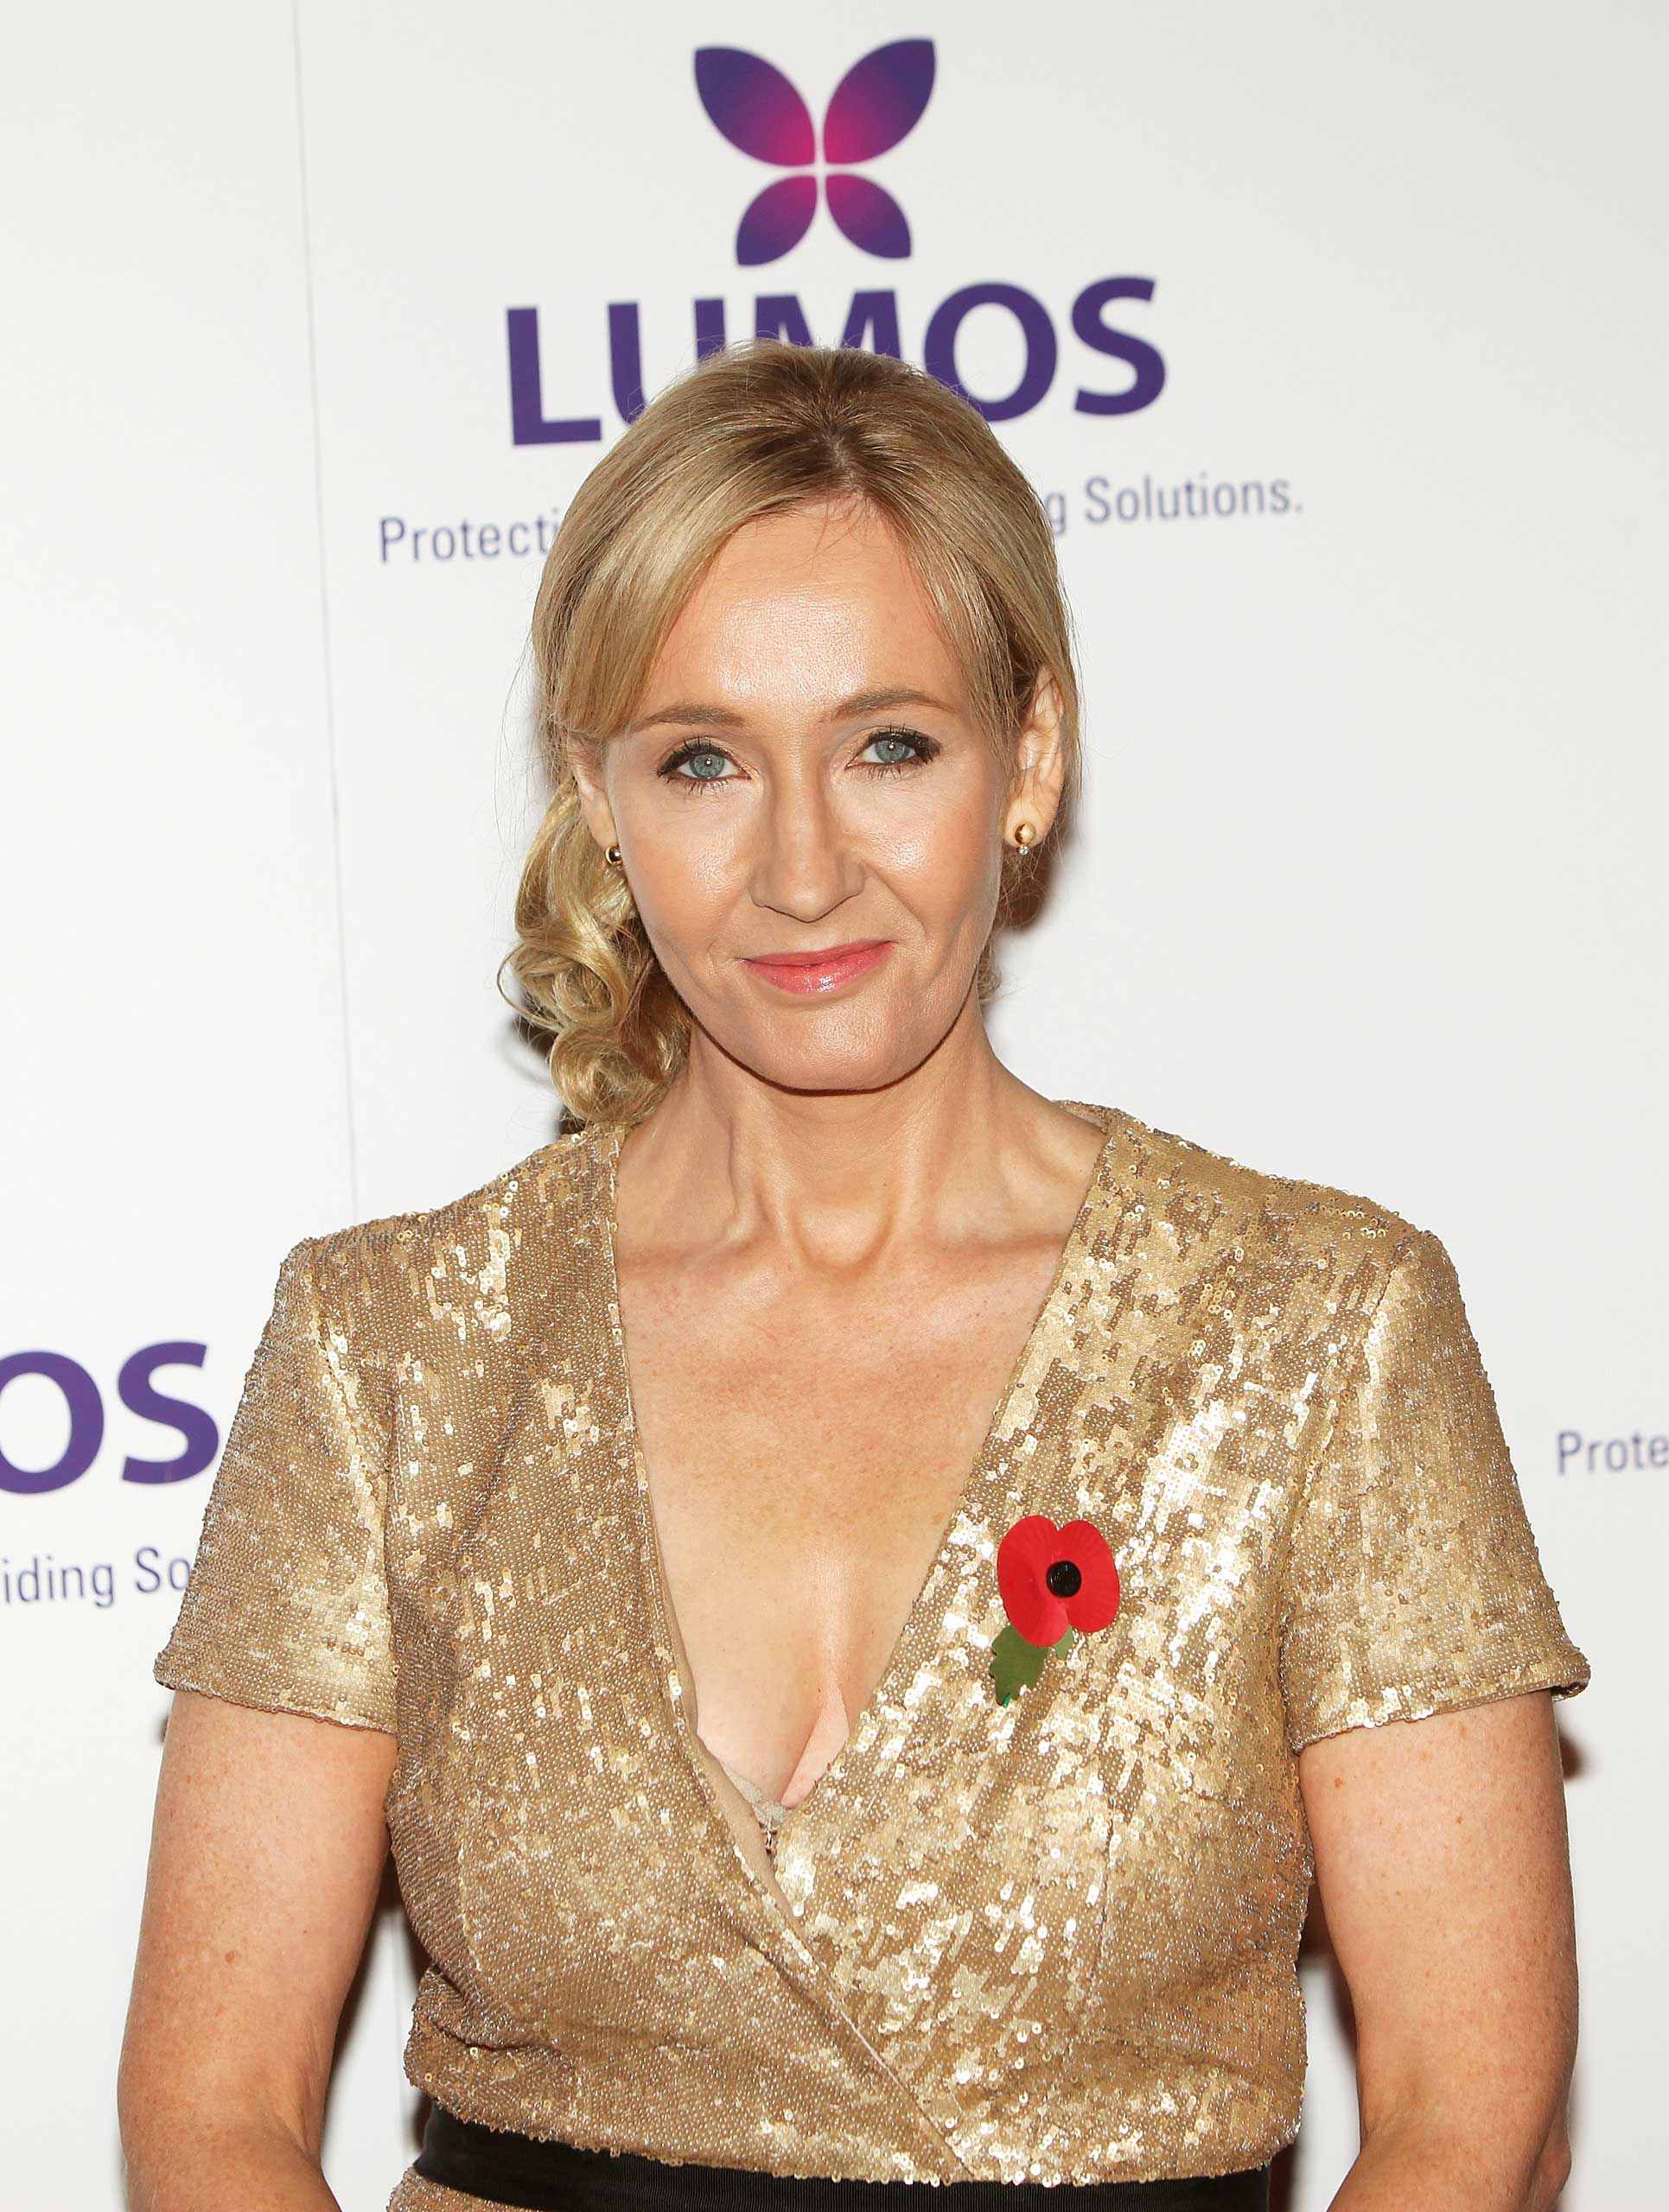 J.K. Rowling attends the Lumos fundraising event hosted by J.K. Rowling at The Warner Bros. Harry Potter Tour on November 9, 2013 in London, England.